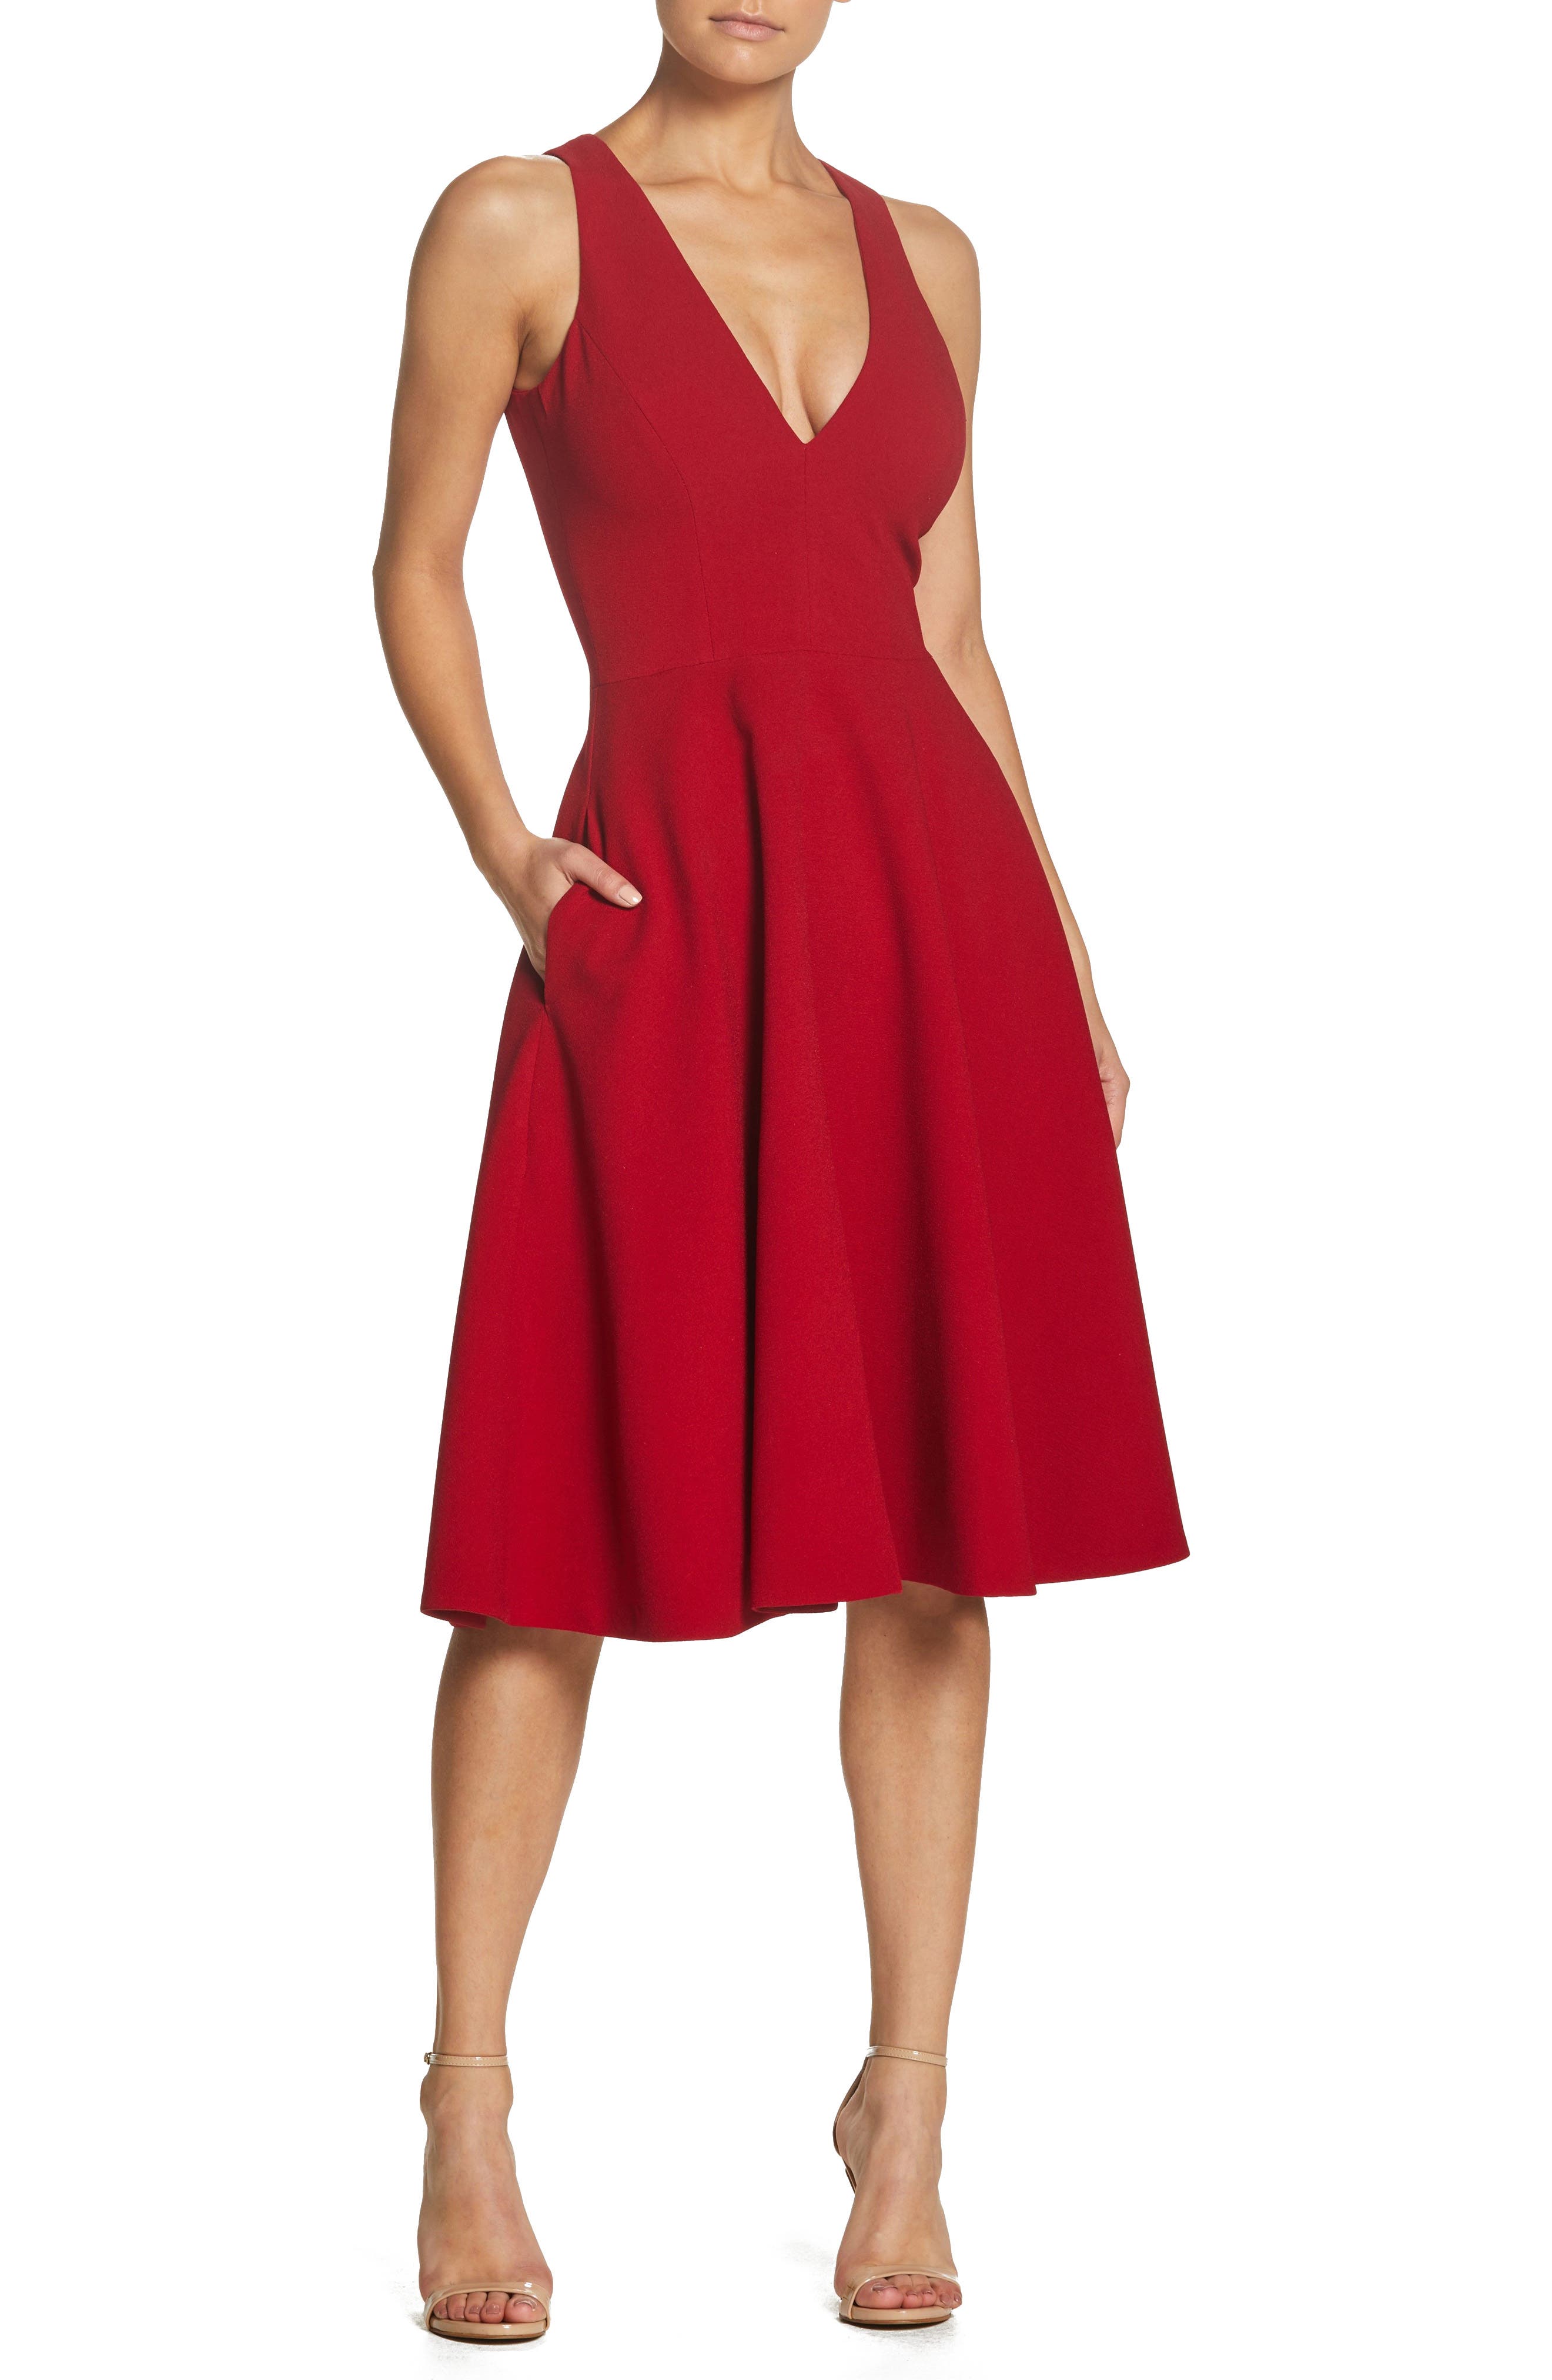 red party dresses for women